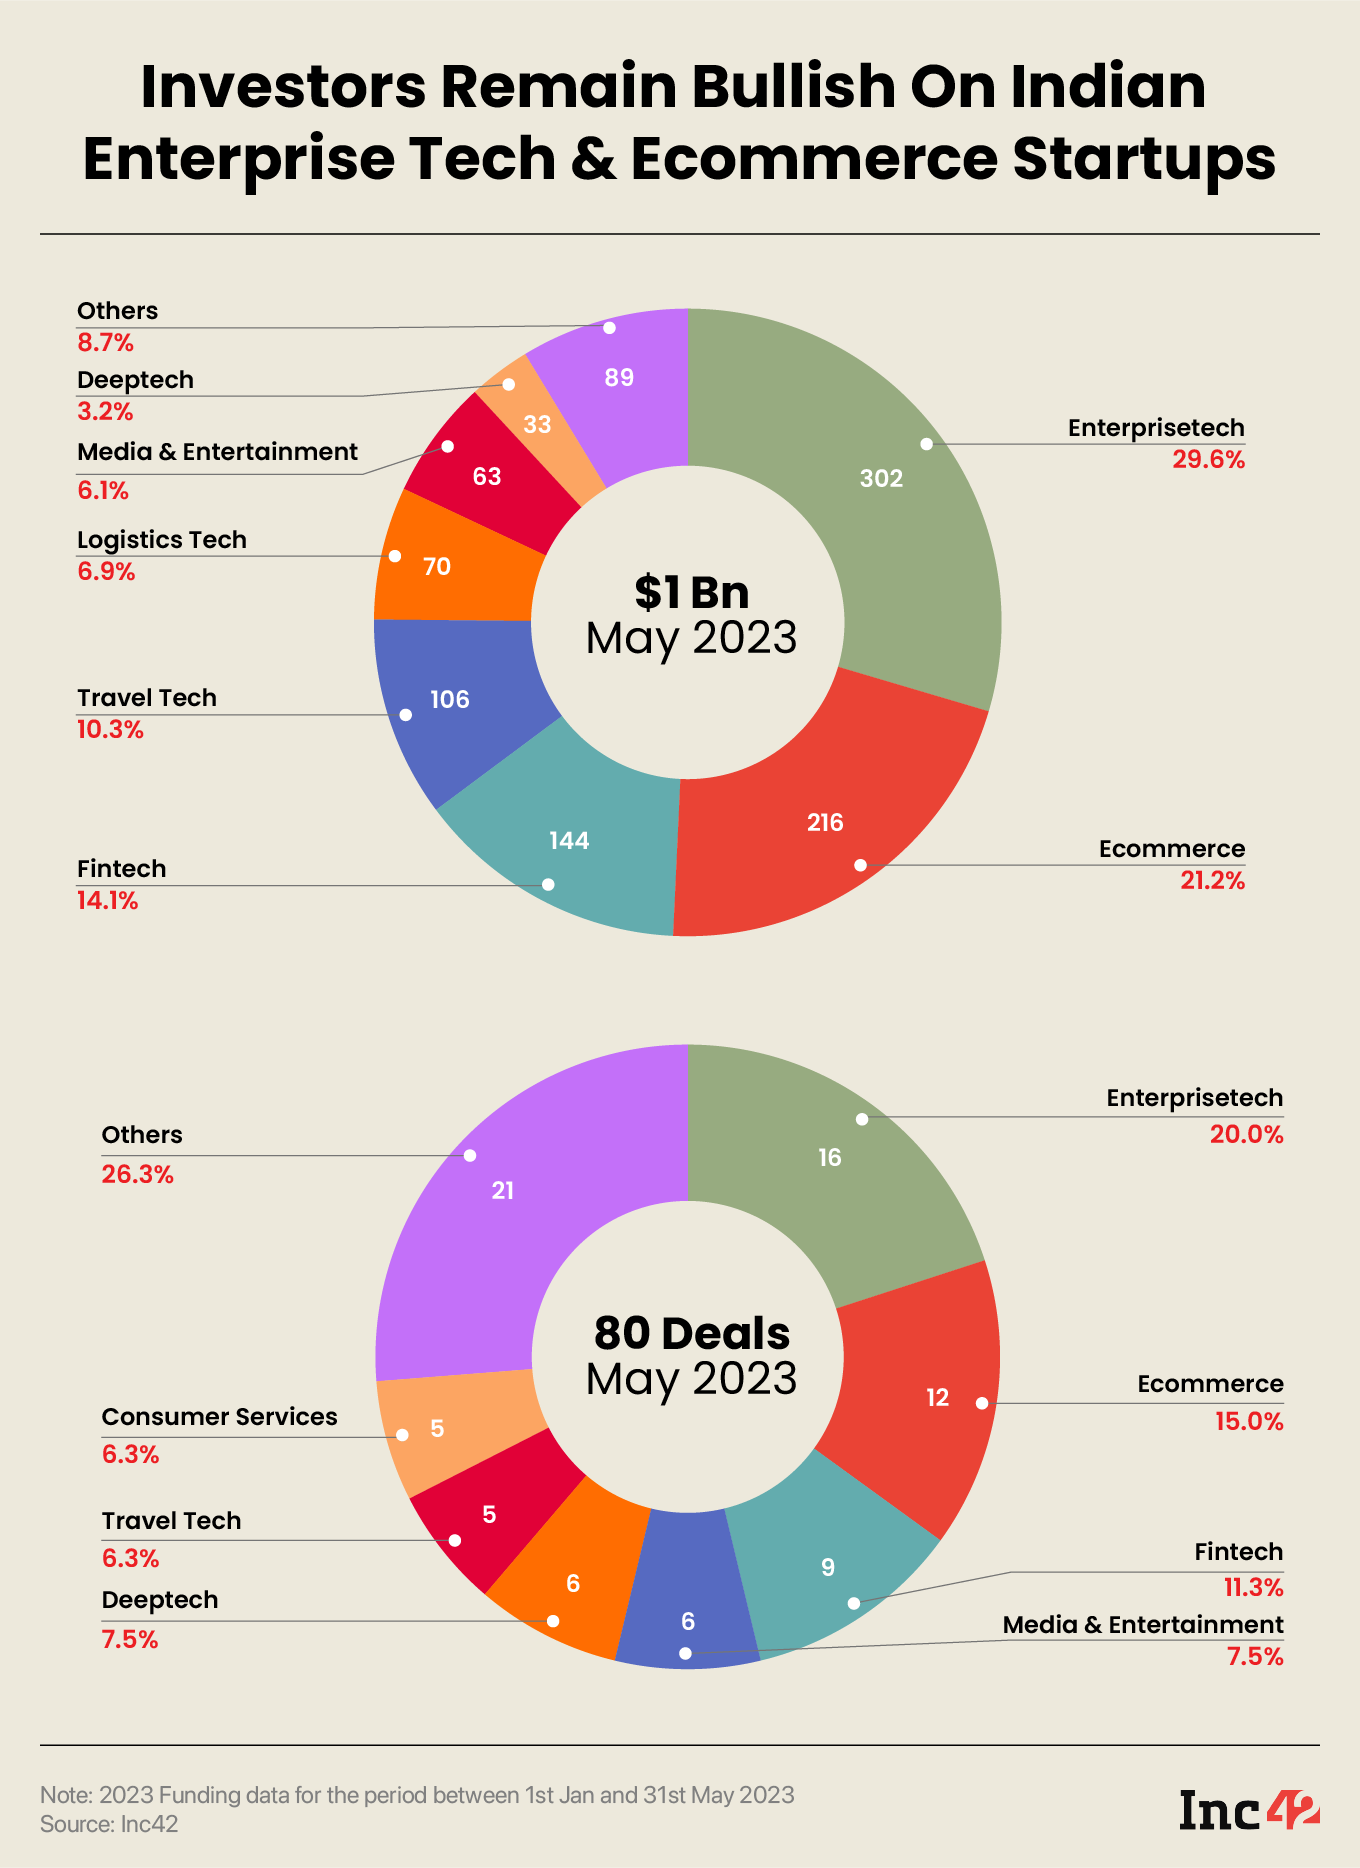 Startups in the sector raised $302 Mn across 16 deals in May 2023, clinching the top spot on both counts.